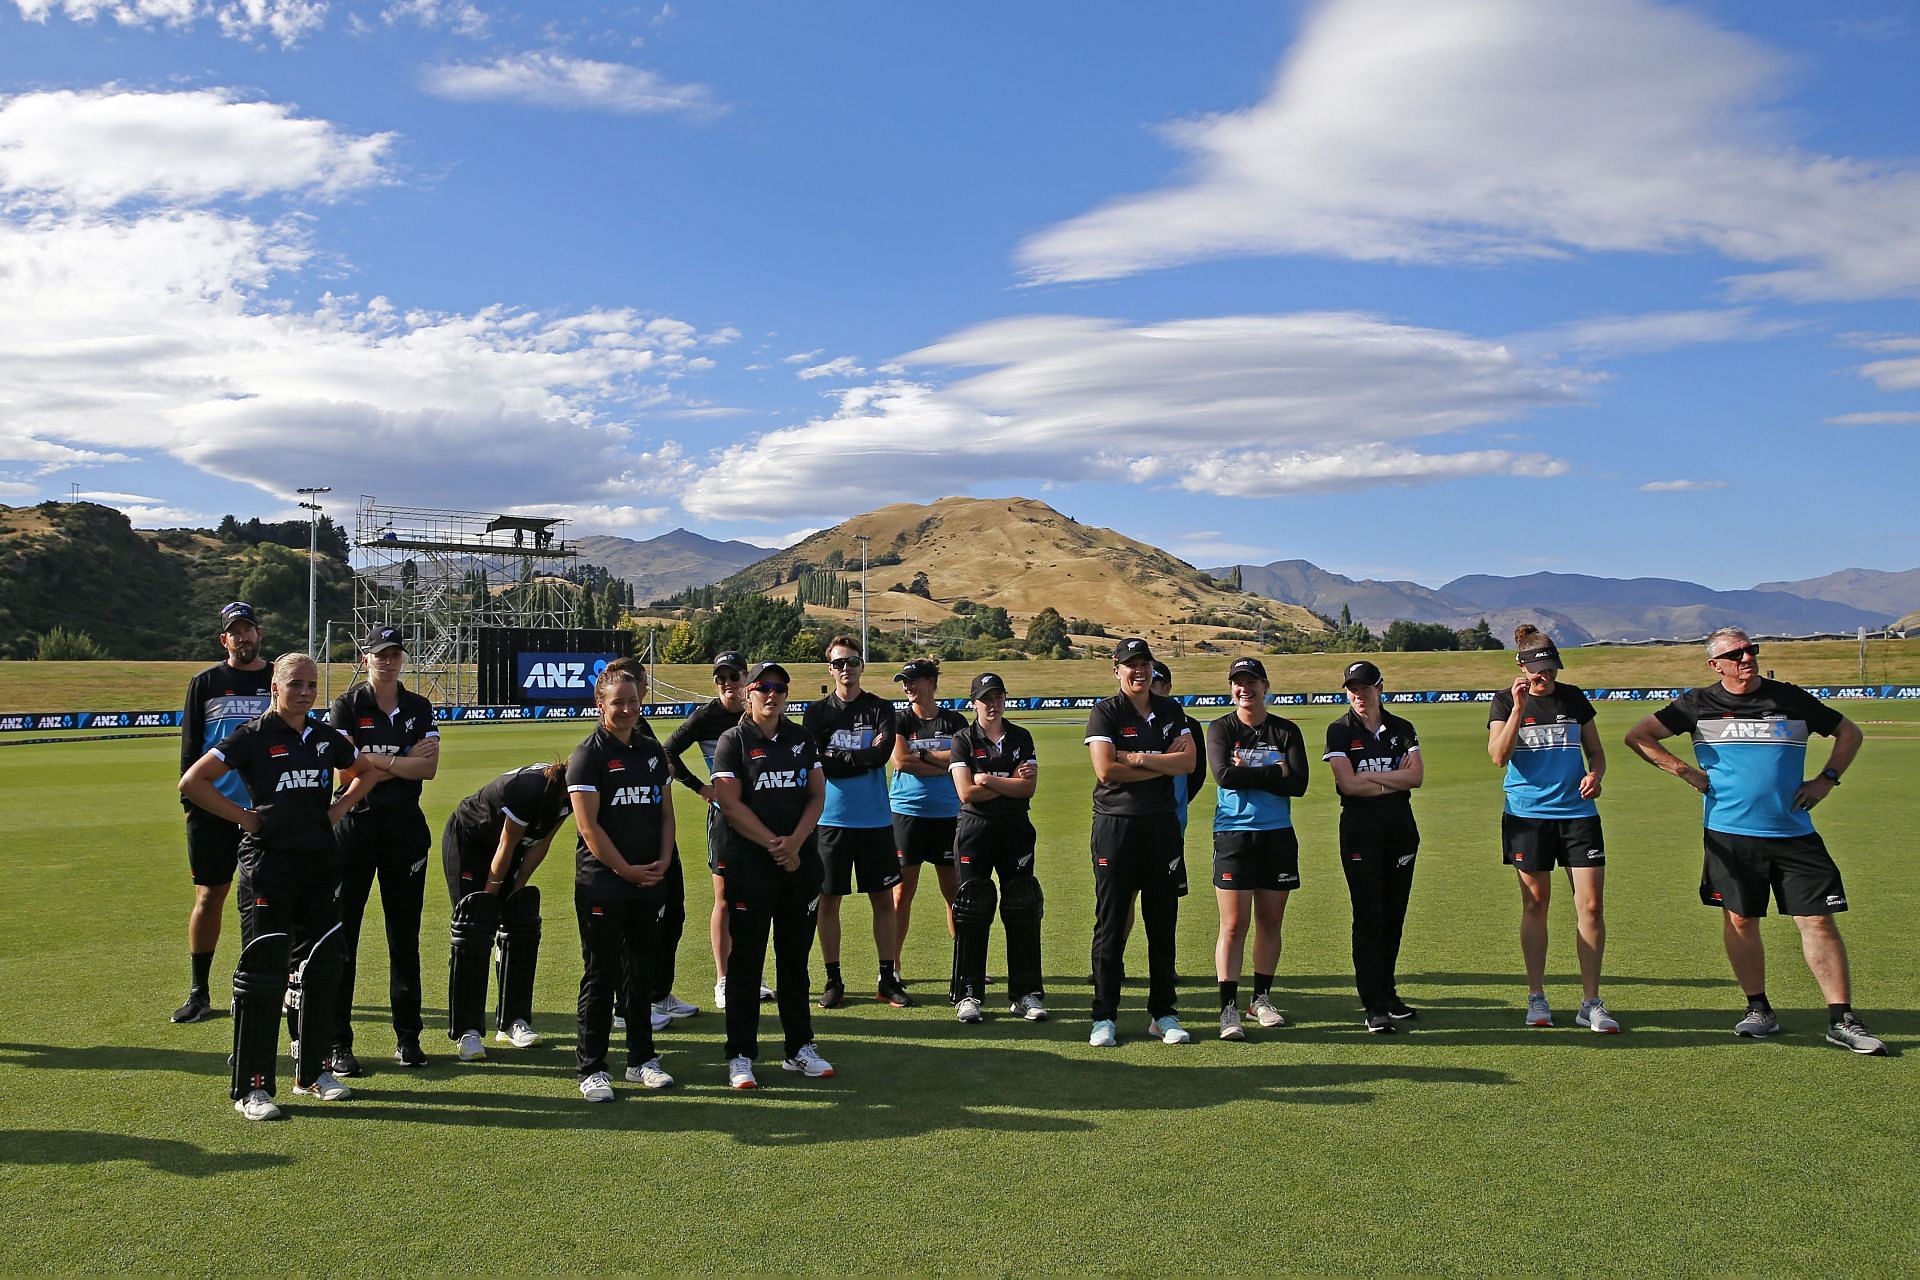 New Zealand v India - 2nd ODI in Queenstown